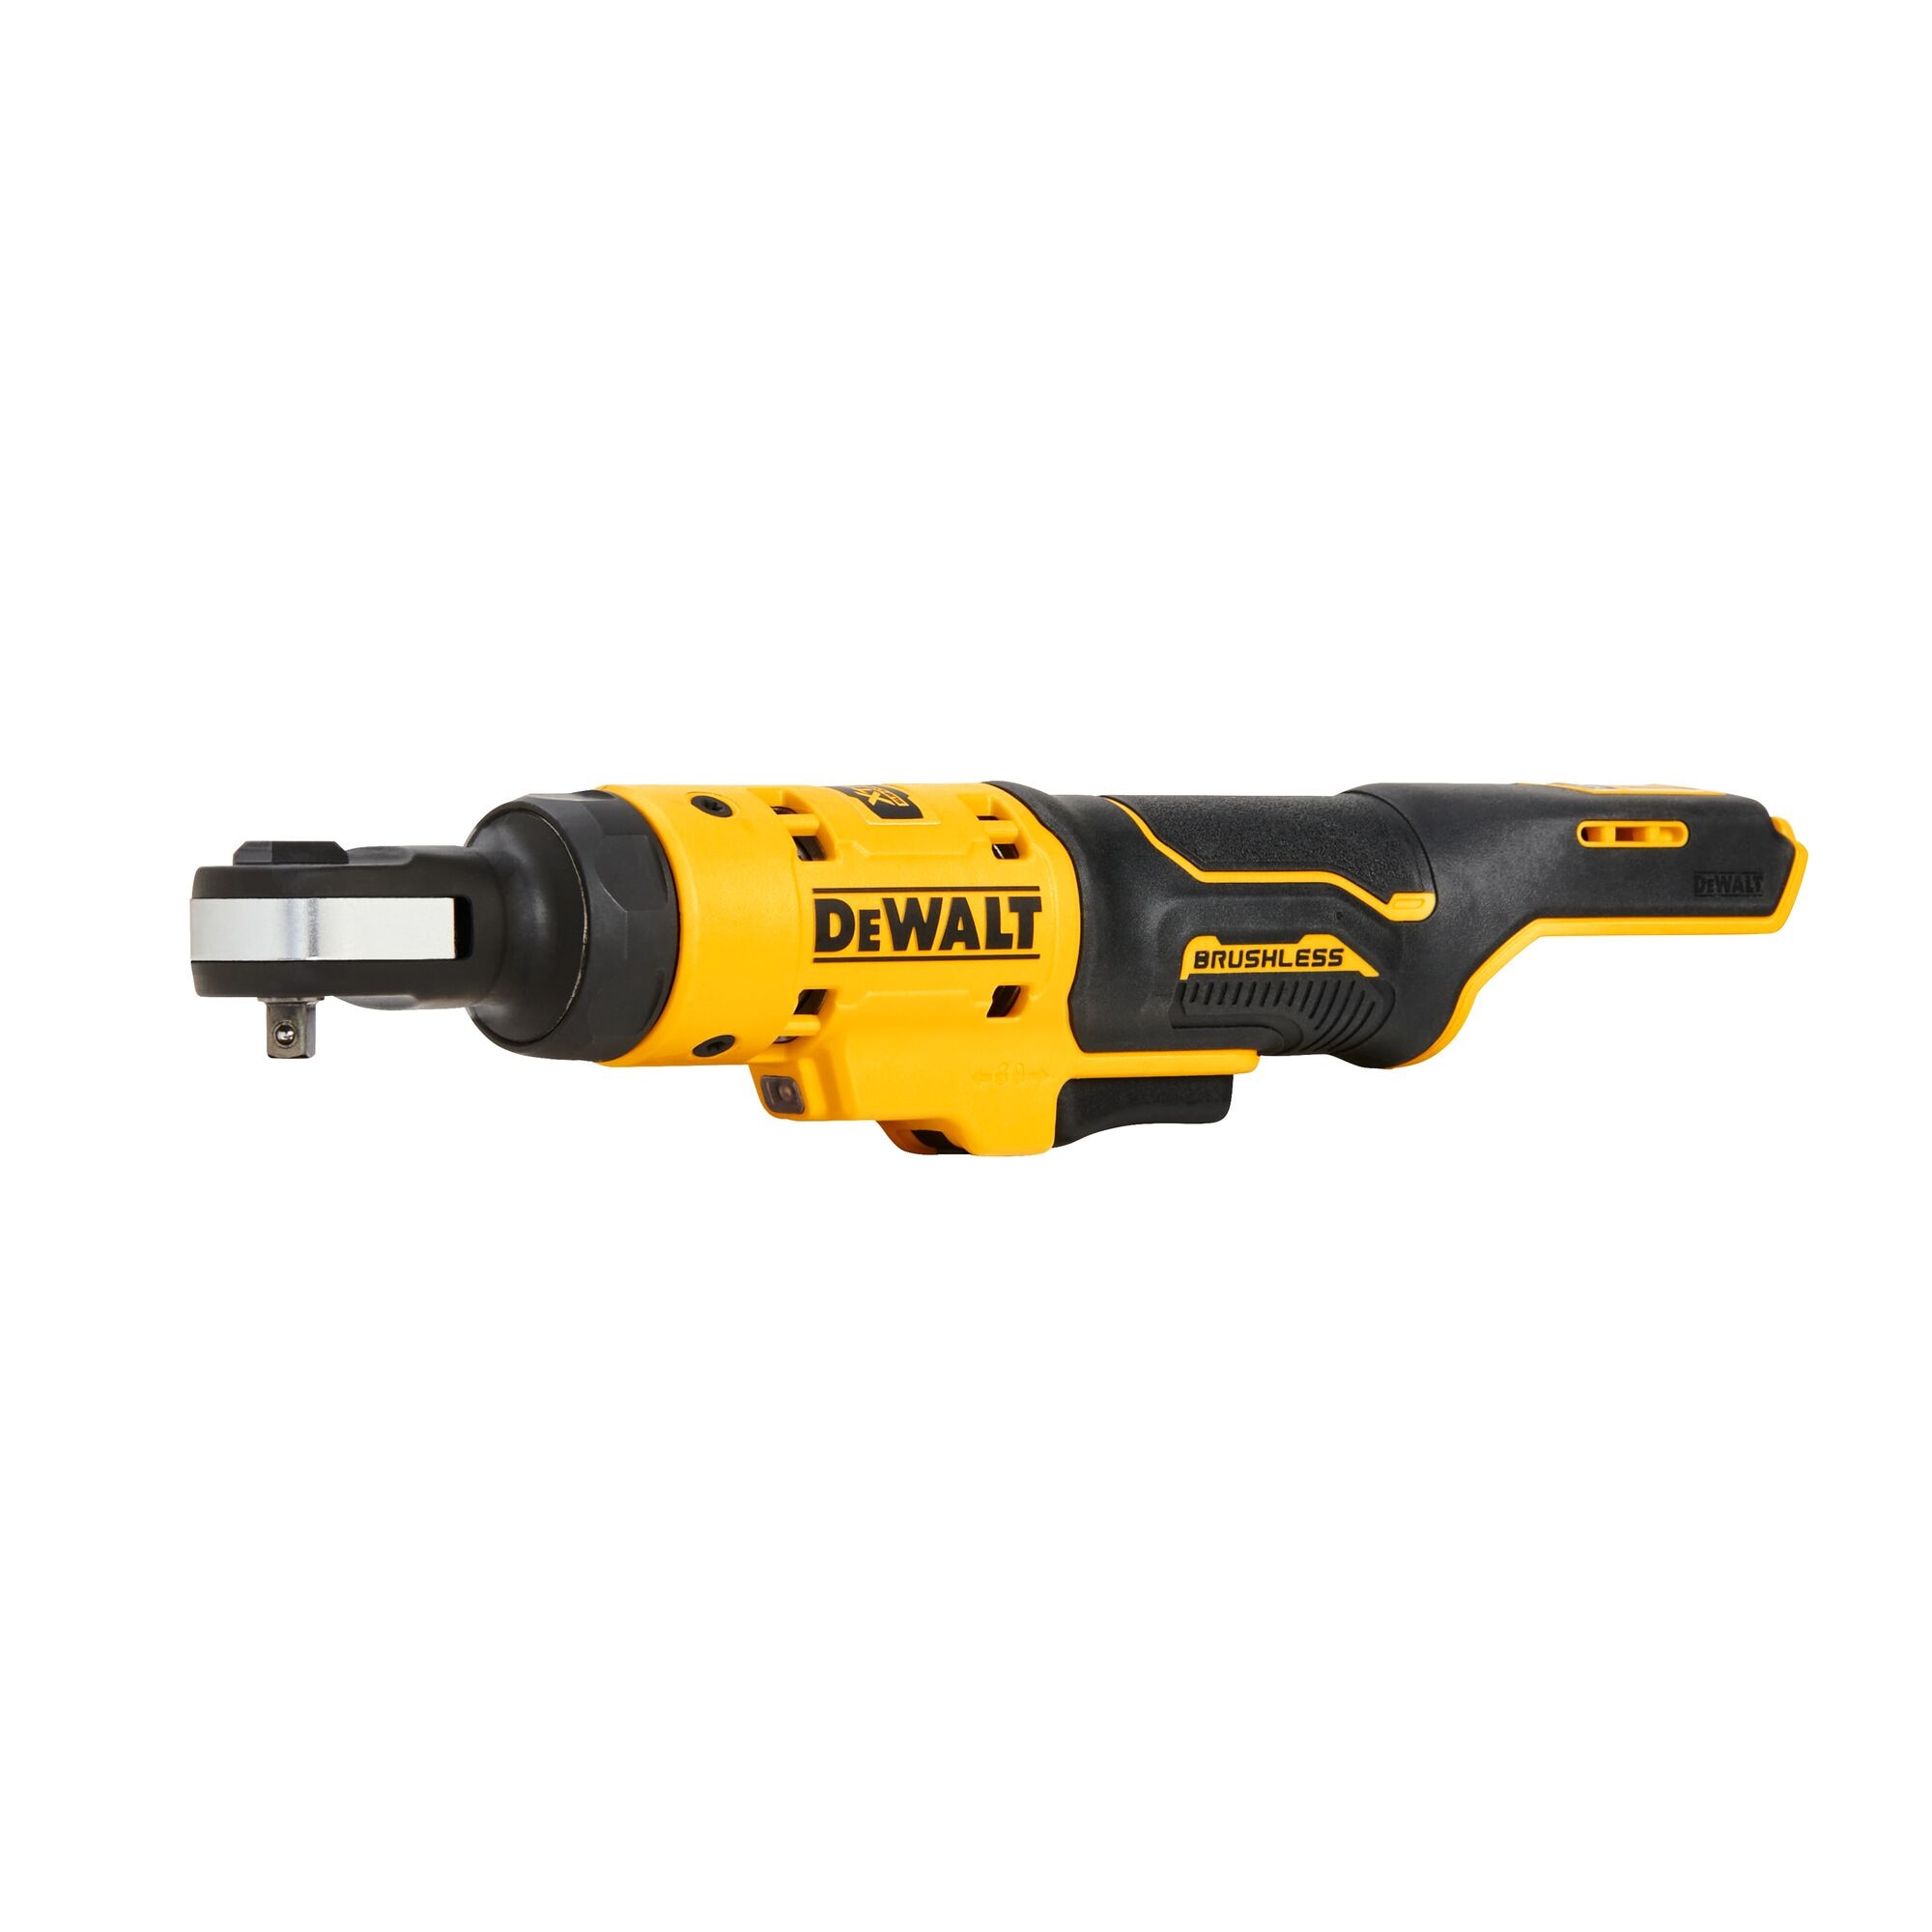 Can someone shed some light on this DeWalt Impact Wrench? : r/Tools